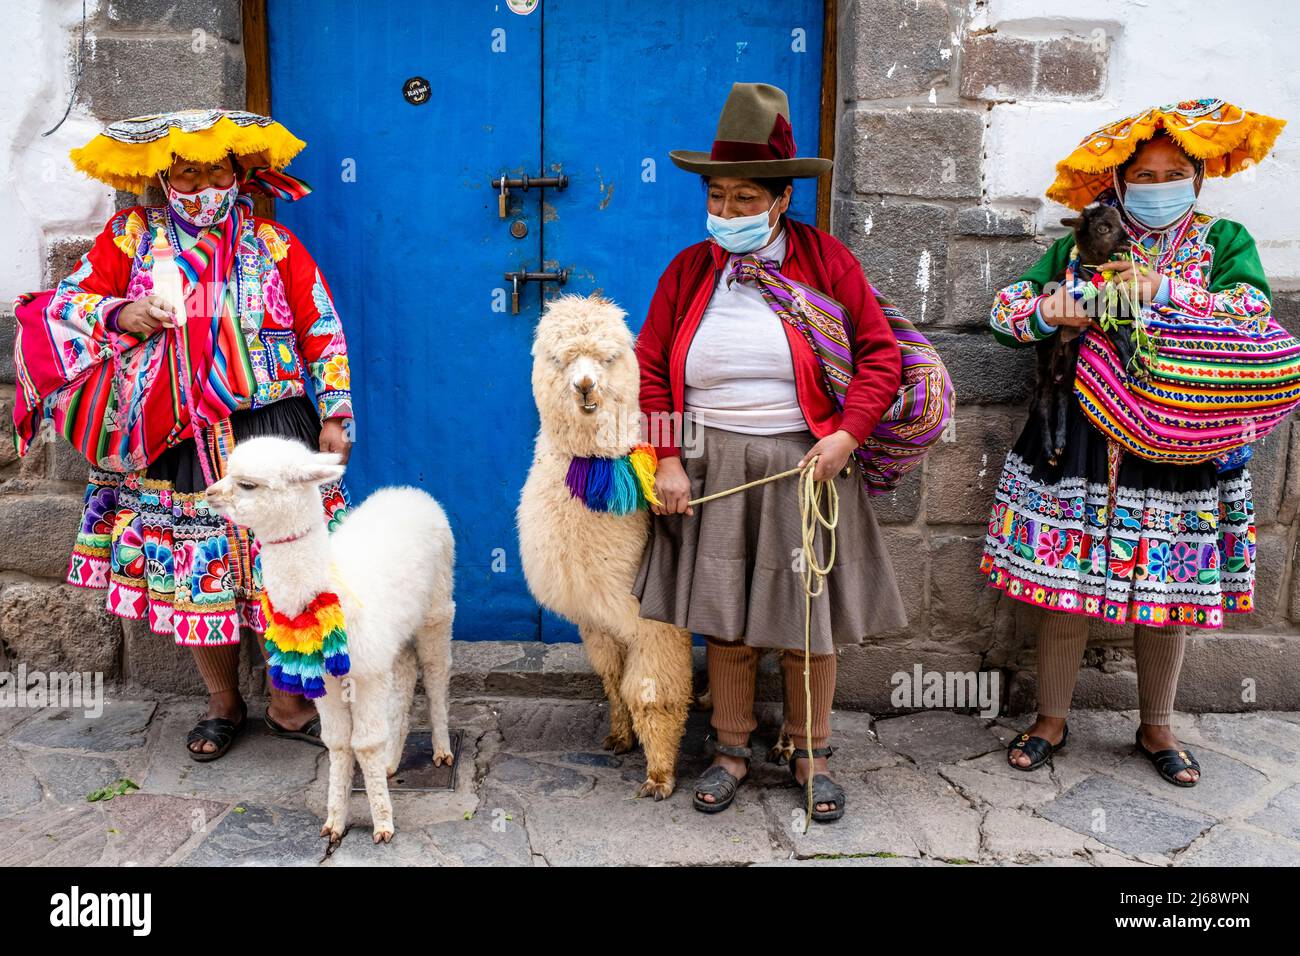 Women In Traditional Costume Pose With Their Pet Alpacas in The San Blas  Area Of Cusco, Cusco Province, Peru Stock Photo - Alamy